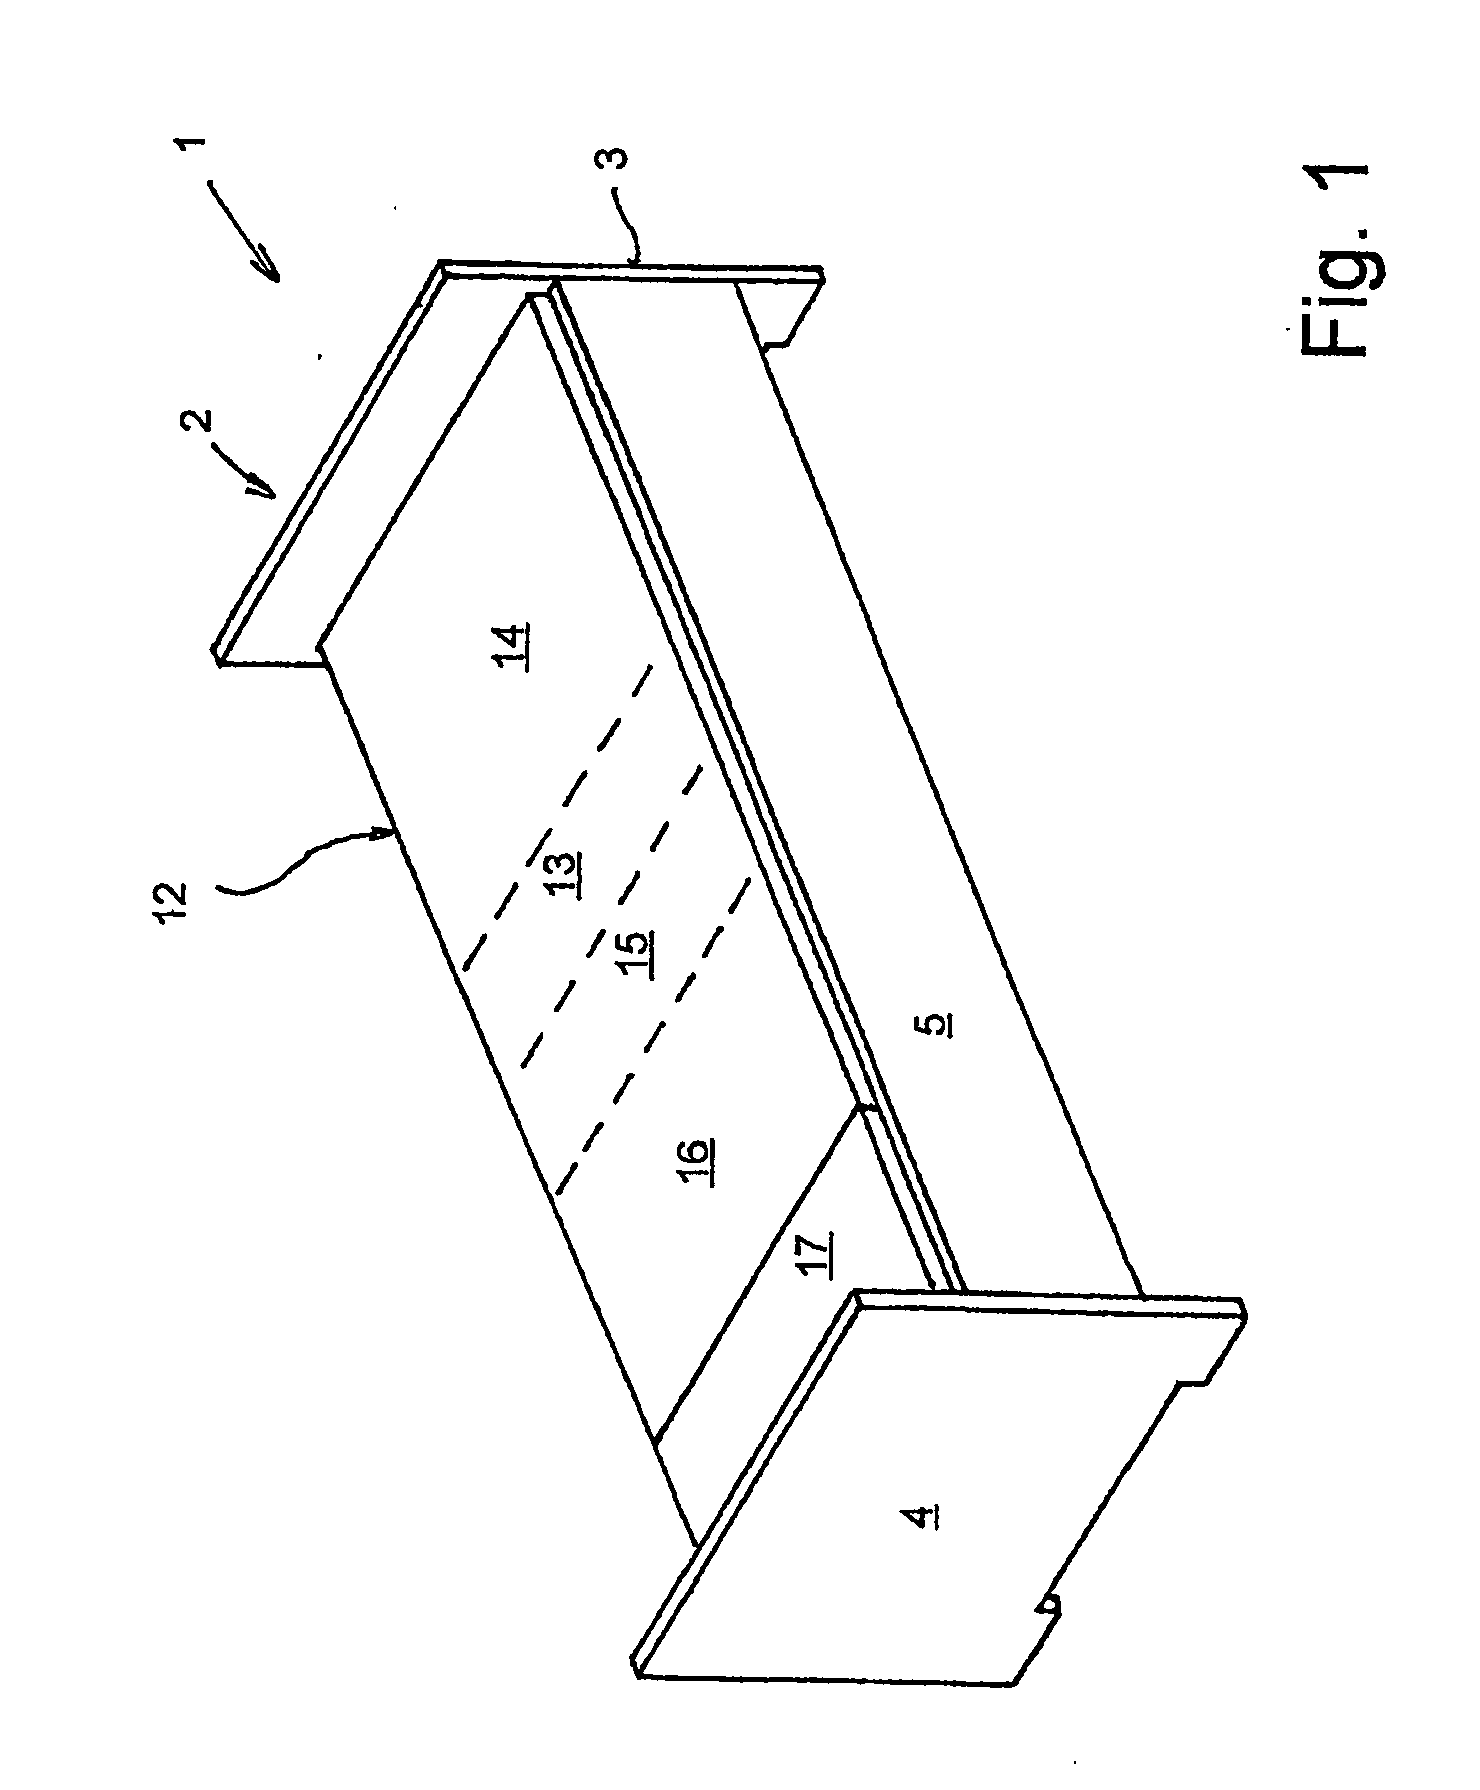 Rotating, sitting-up bed comprising a thigh-raising device